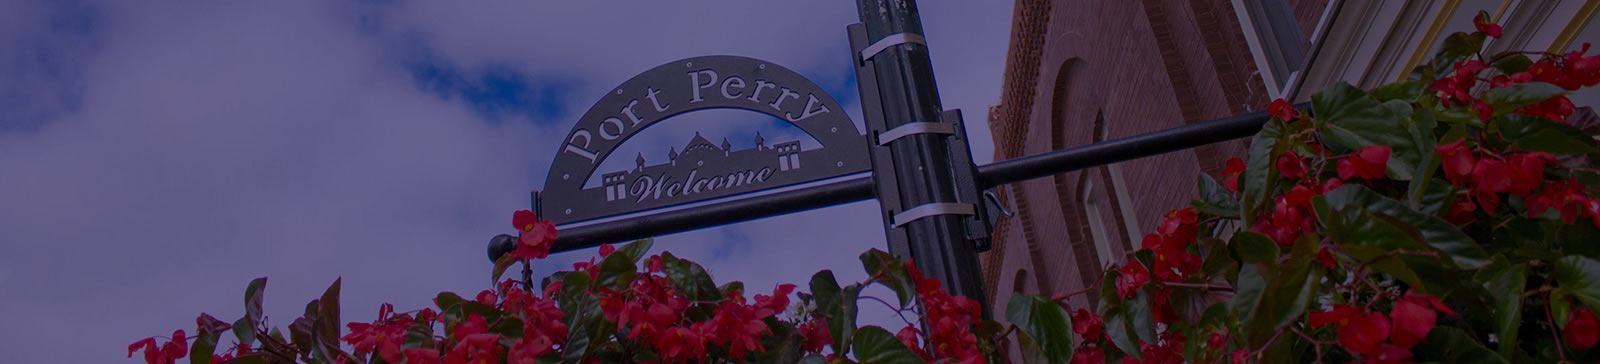 "Port Perry" sign in Downtown Port Perry.